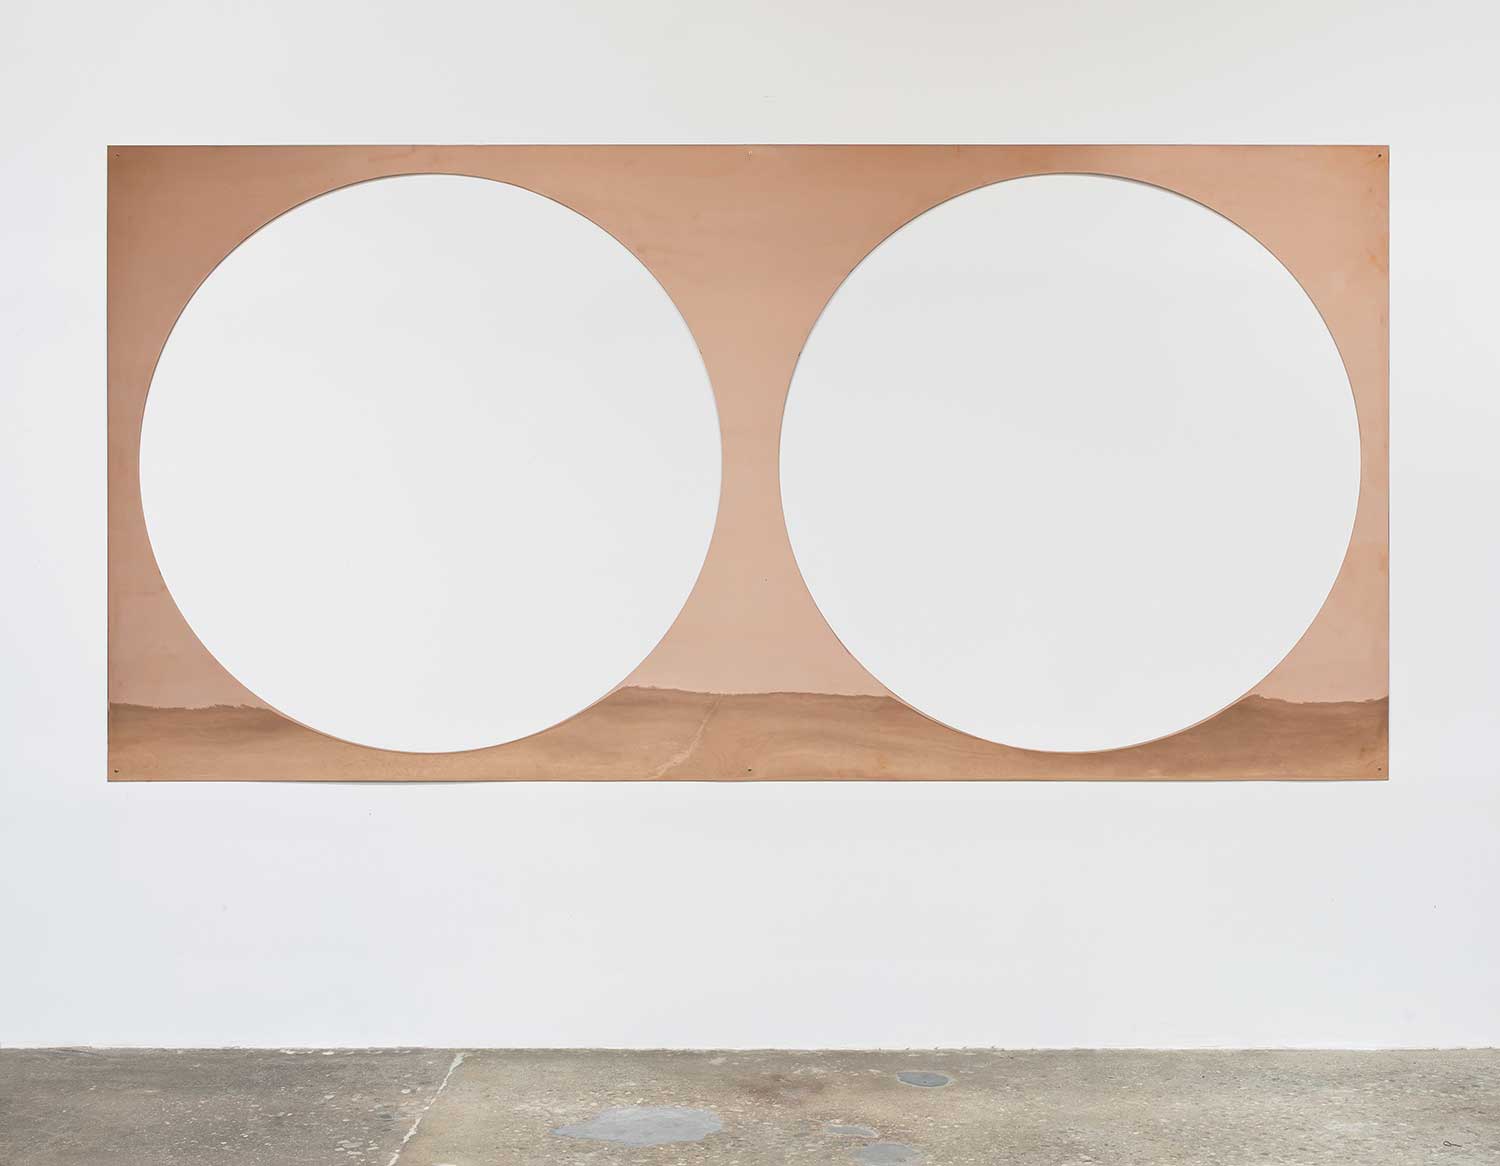 Copper Remnant (Table: designed by unknown, date unknown; Galerie Rodolphe Janssen, Brussels, Belgium, September 6th, 2011), 2012, polished copper, 152.4 x 304.8 cm. Photo: Brian Forrest, courtesy of the artist and Regen Projects, Los Angeles